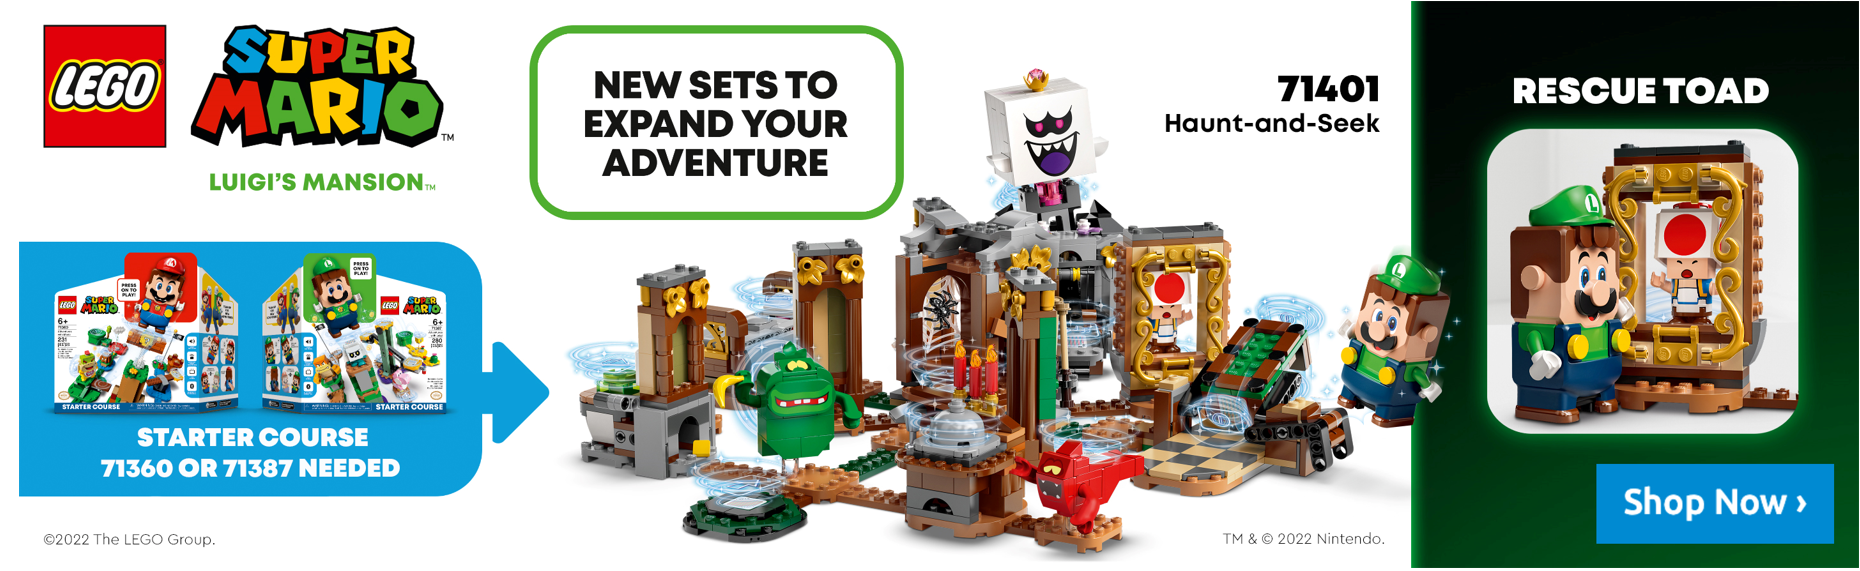 LEGO Super Mario Adventures with Mario Starter Course Set, Buildable Toy  Game, Birthday Gift for Super Mario Bros. Fans and Kids Ages 6 and Up with  Interactive Mario Figure and Bowser Jr.